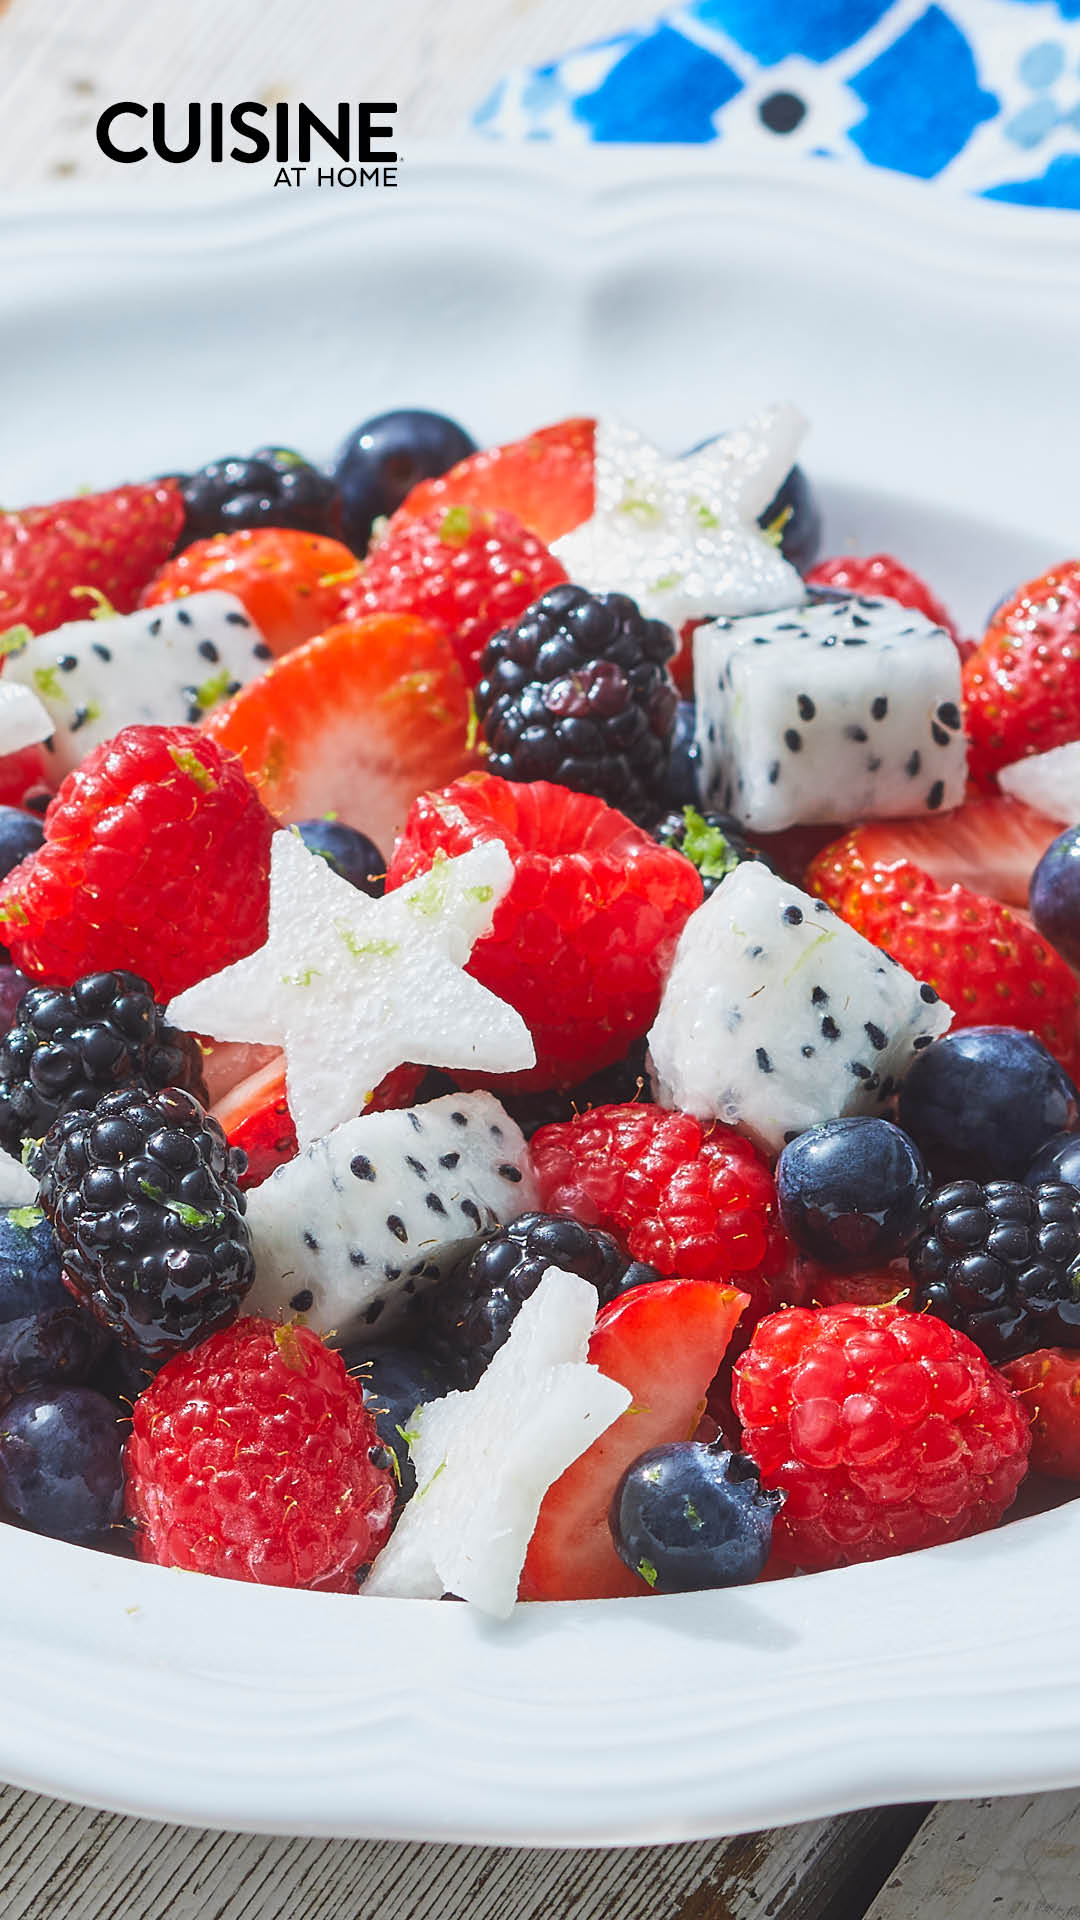 Free Mobile Wallpaper - July 2021 - Cuisine at Home - Summer fruit salad red, white and blue stars berries colorful cooking food aesthetic